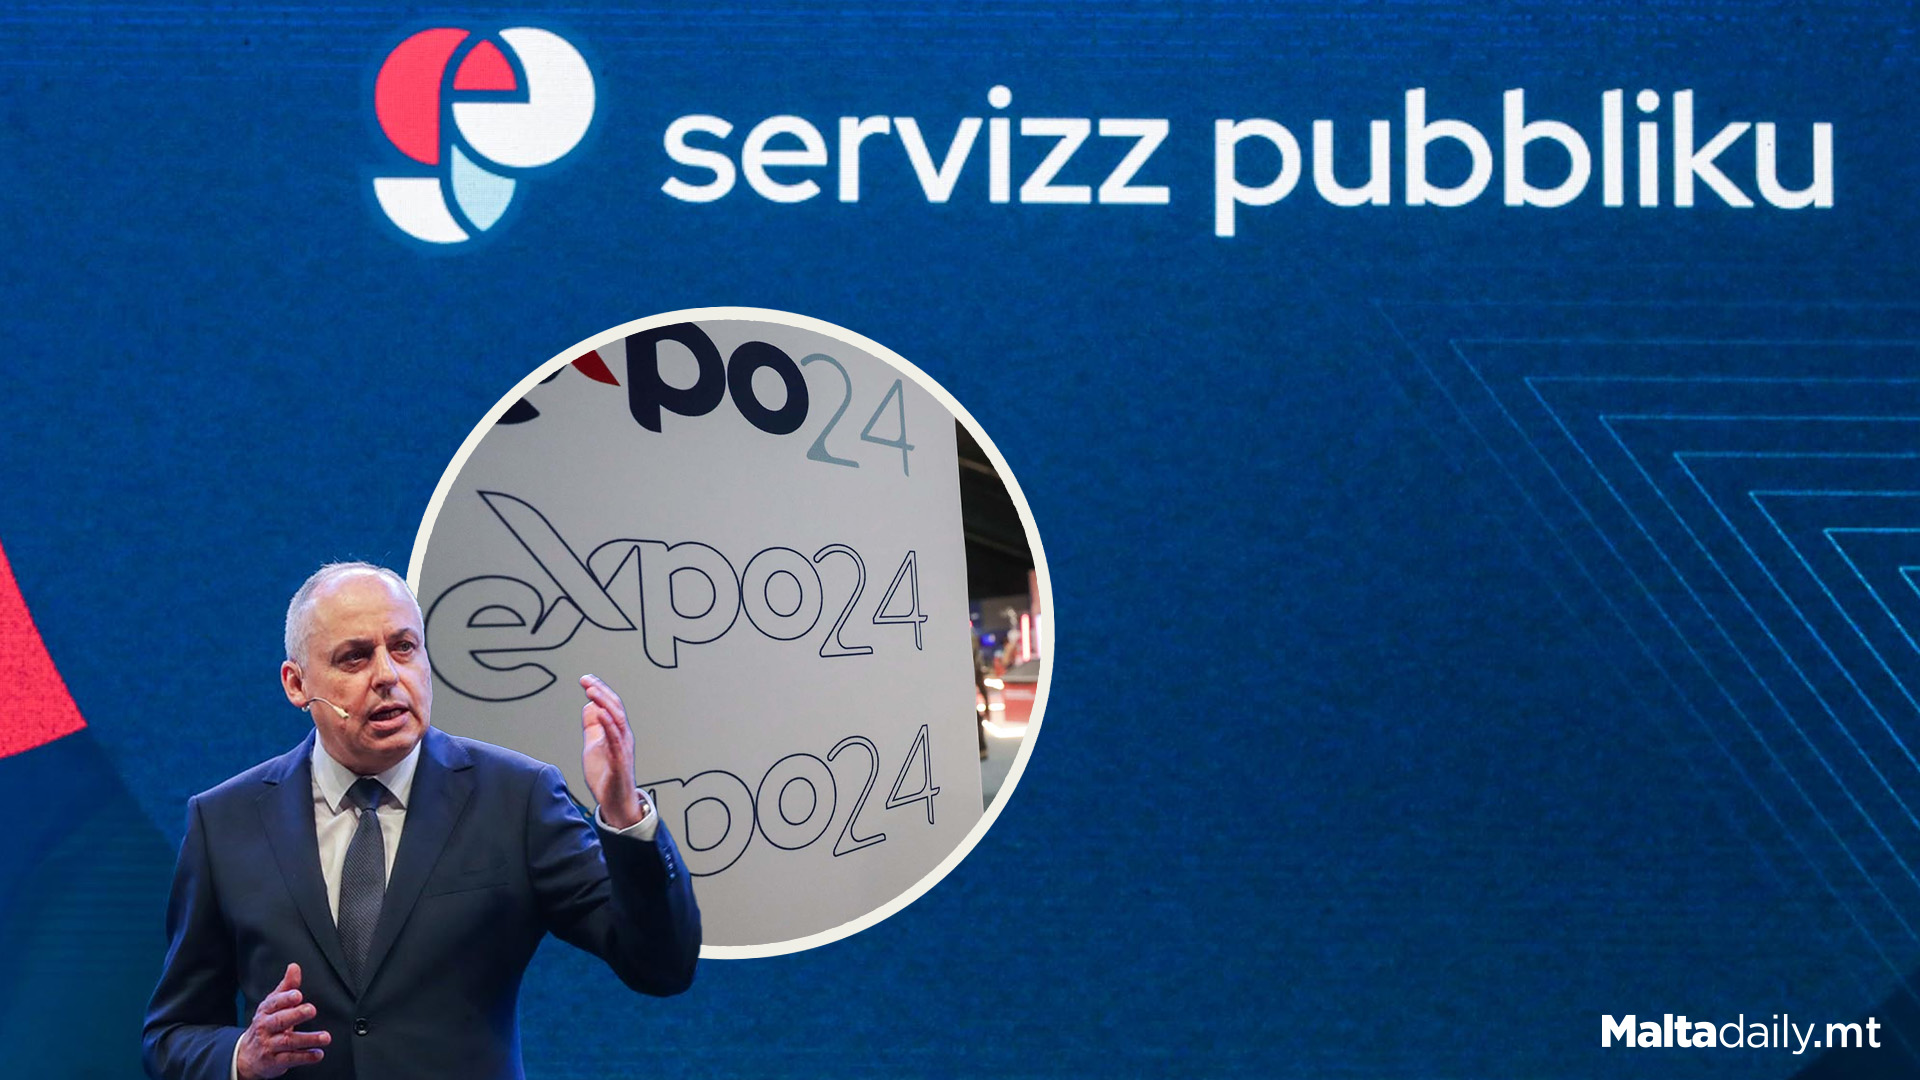 A Total Of 55,000 People Attended Public Service EXPO24